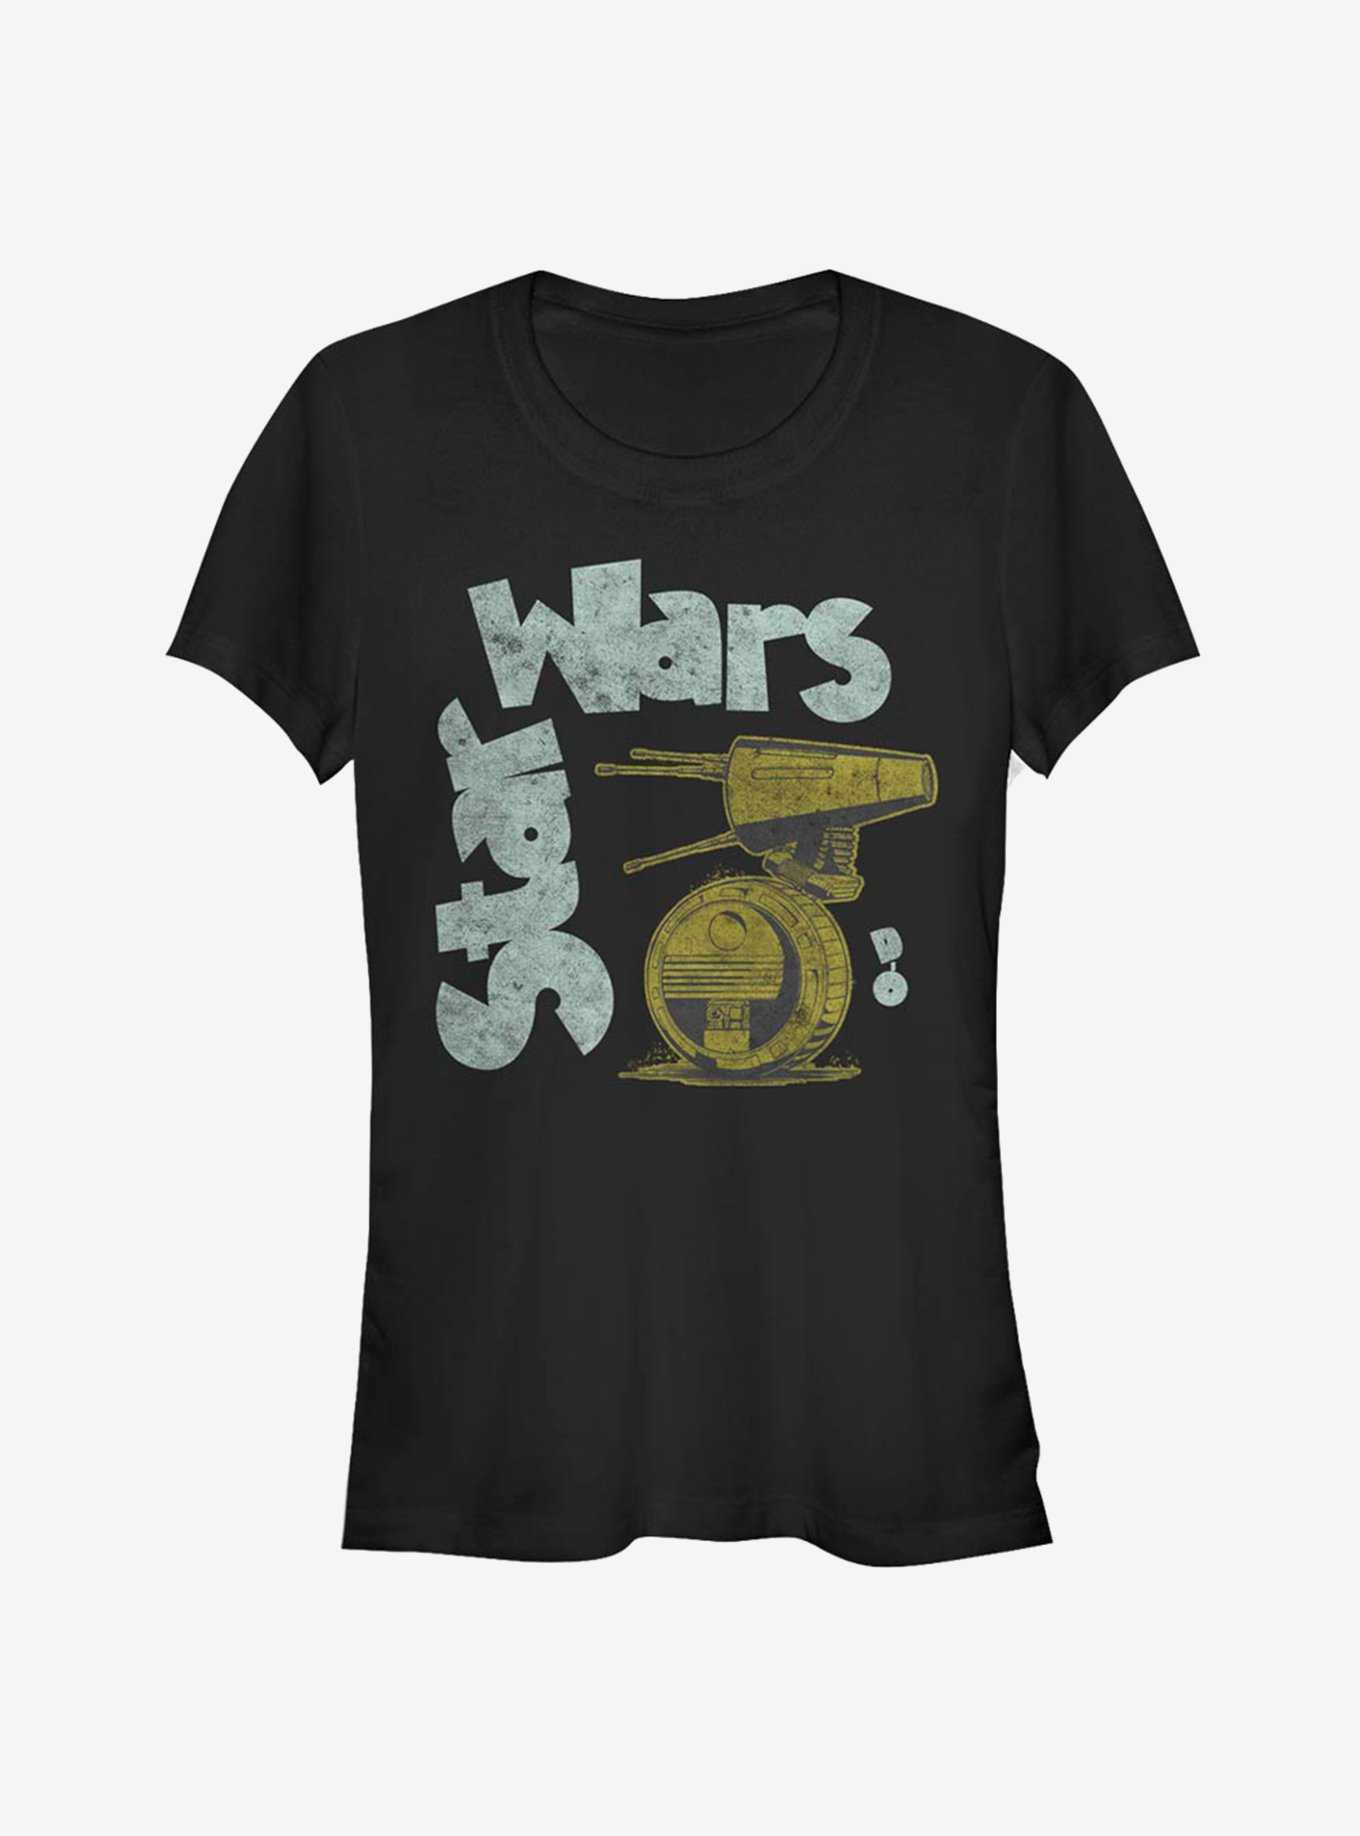 Star Wars Another New Droid Girls T-Shirt, , hi-res